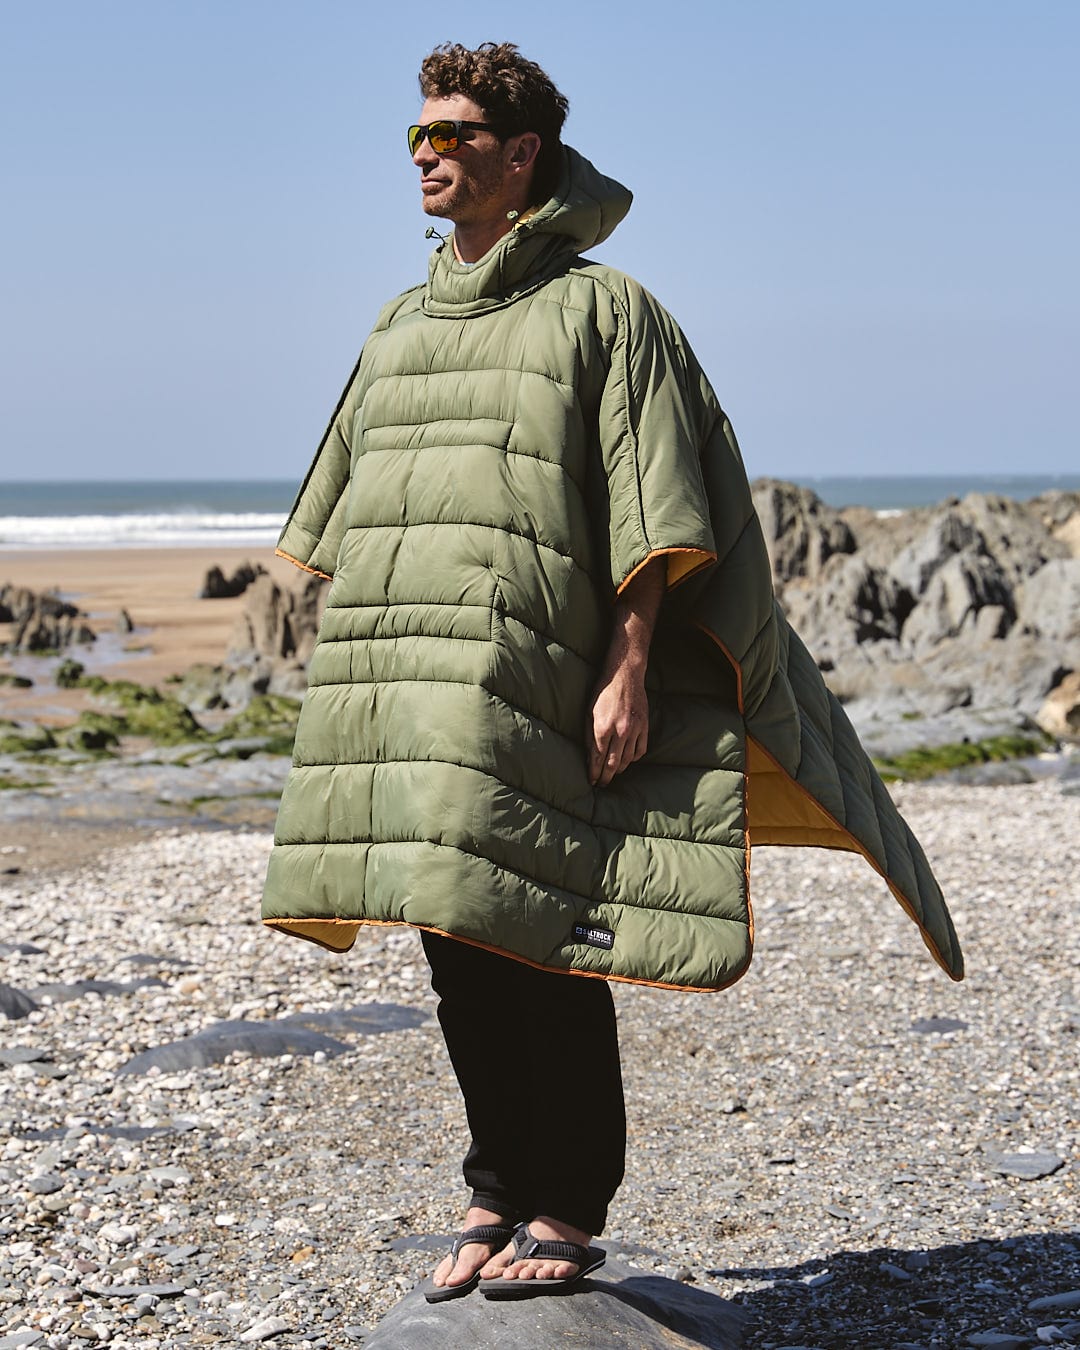 A man in a Sunset - Packable Reversible Poncho - Yellow by Saltrock, standing on a rock.